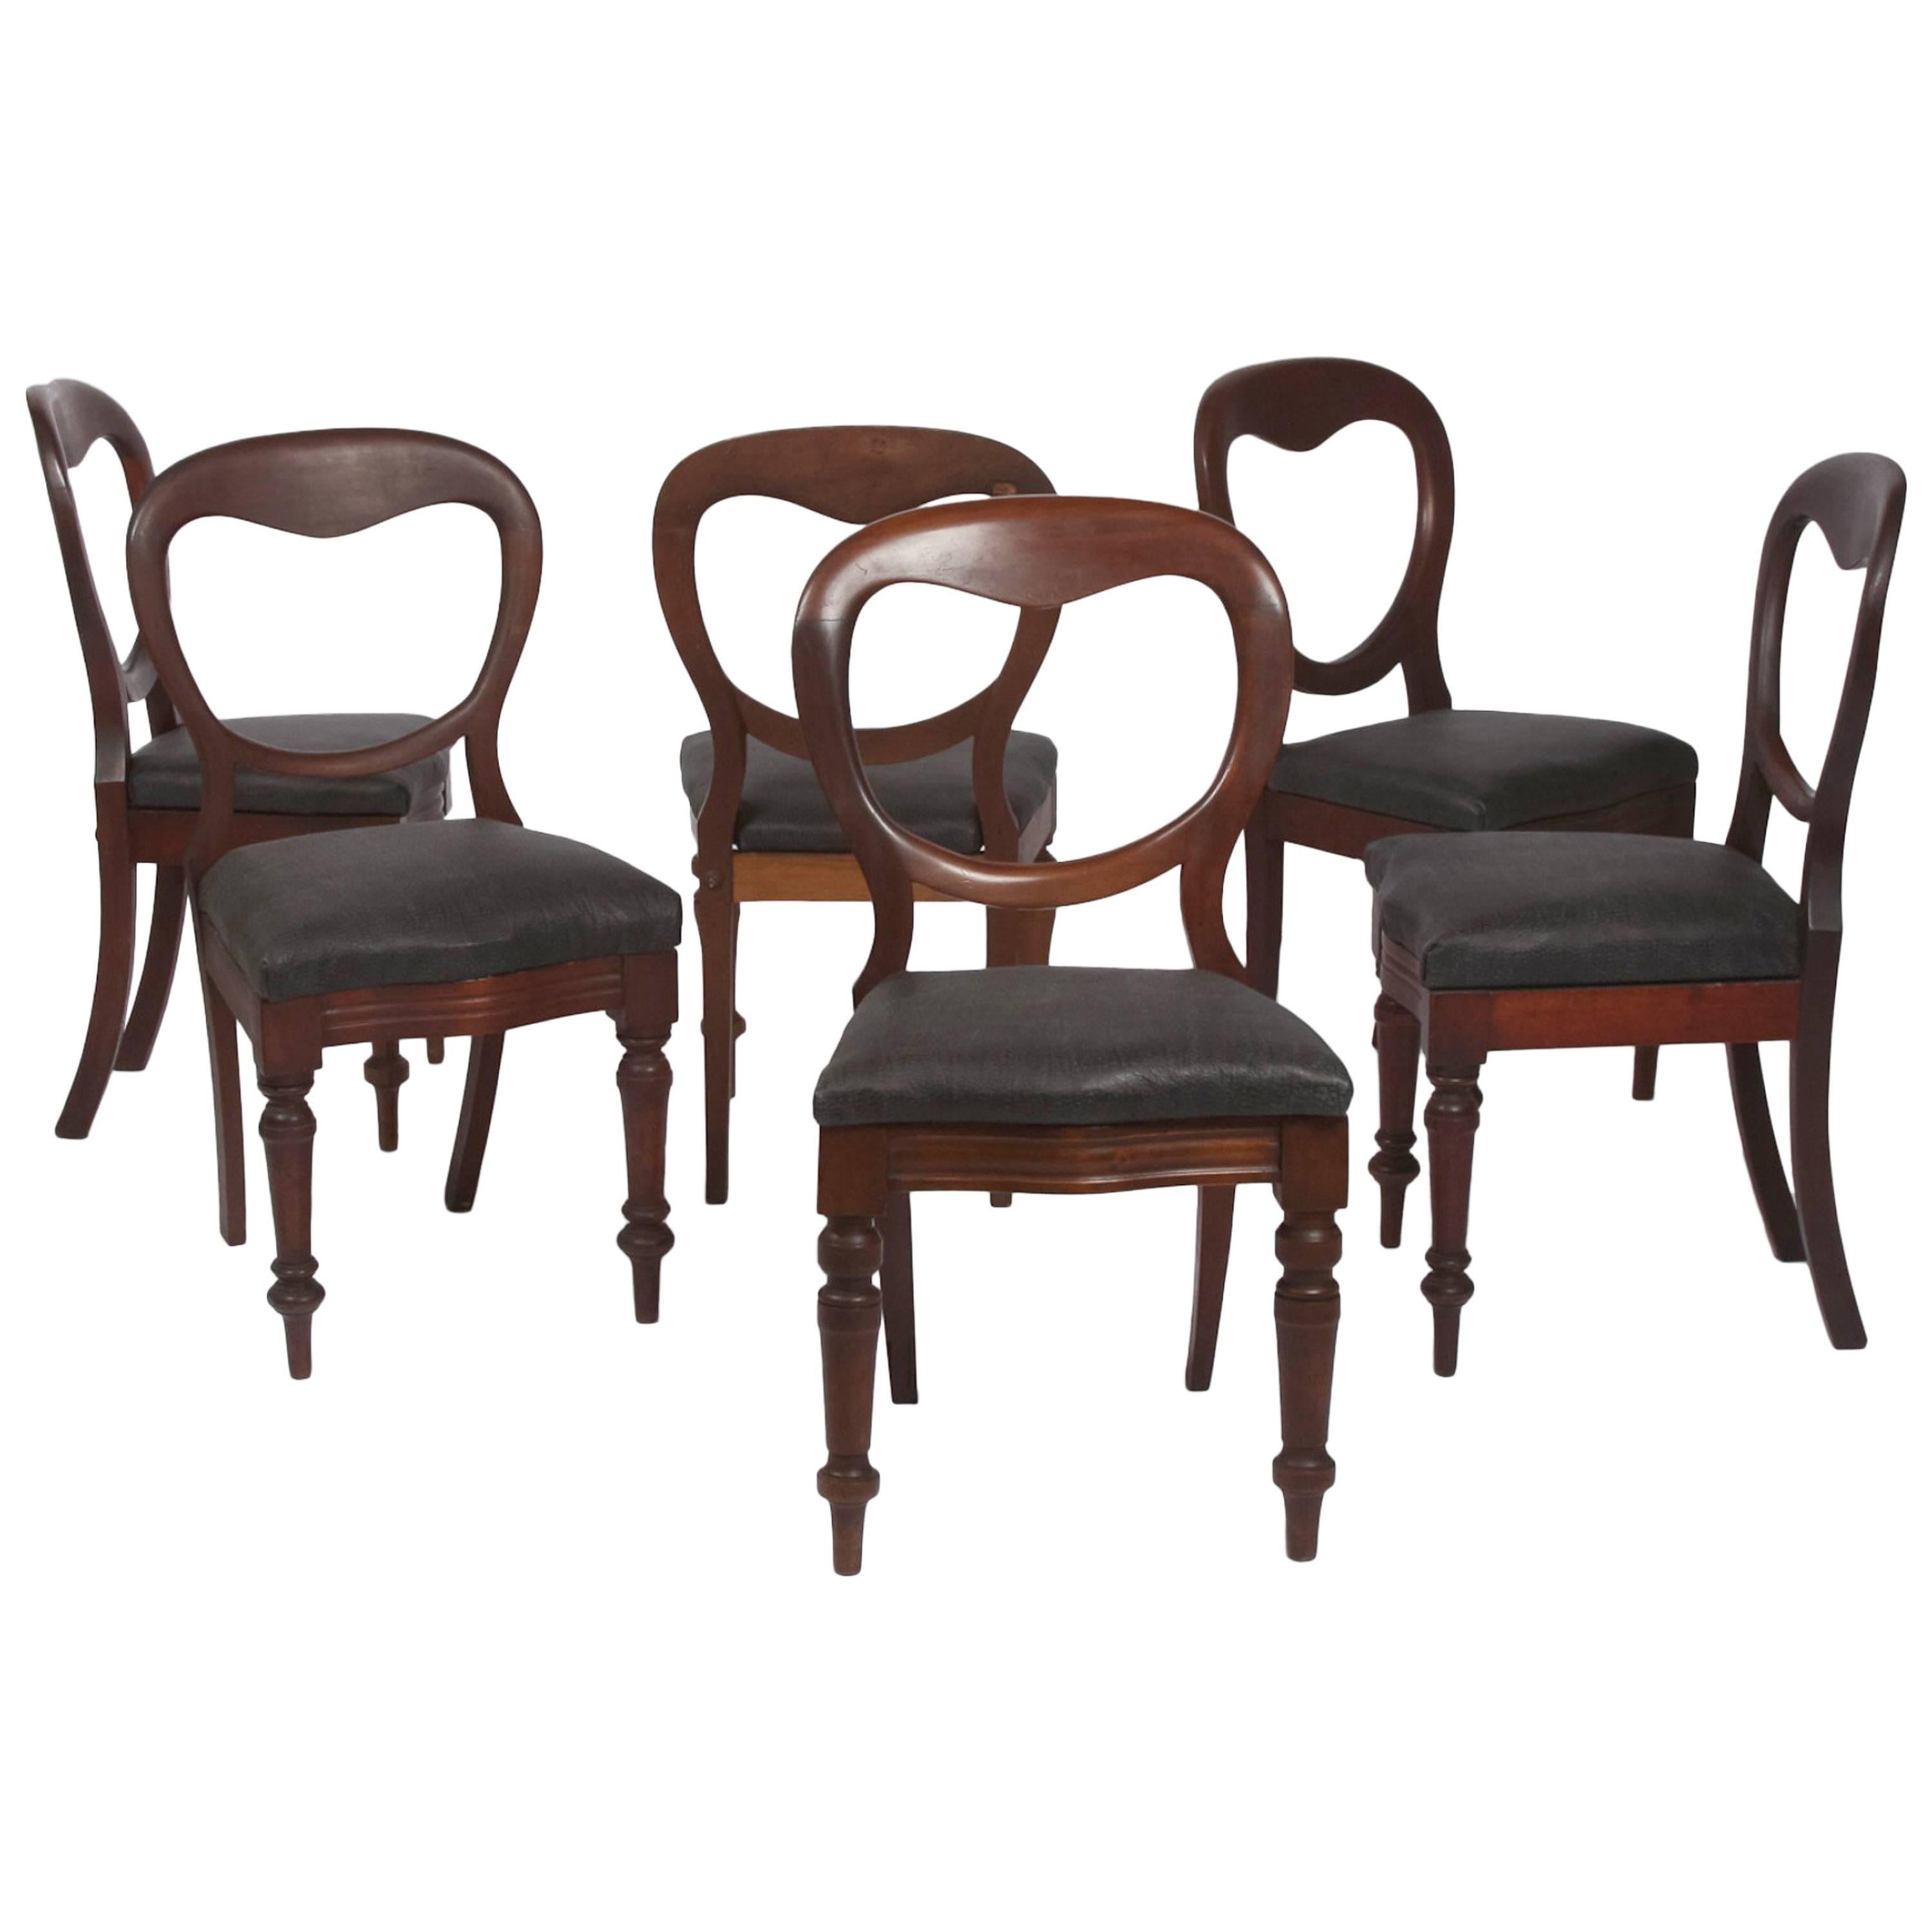 Antique Dining Chairs with Leather Seat For Sale